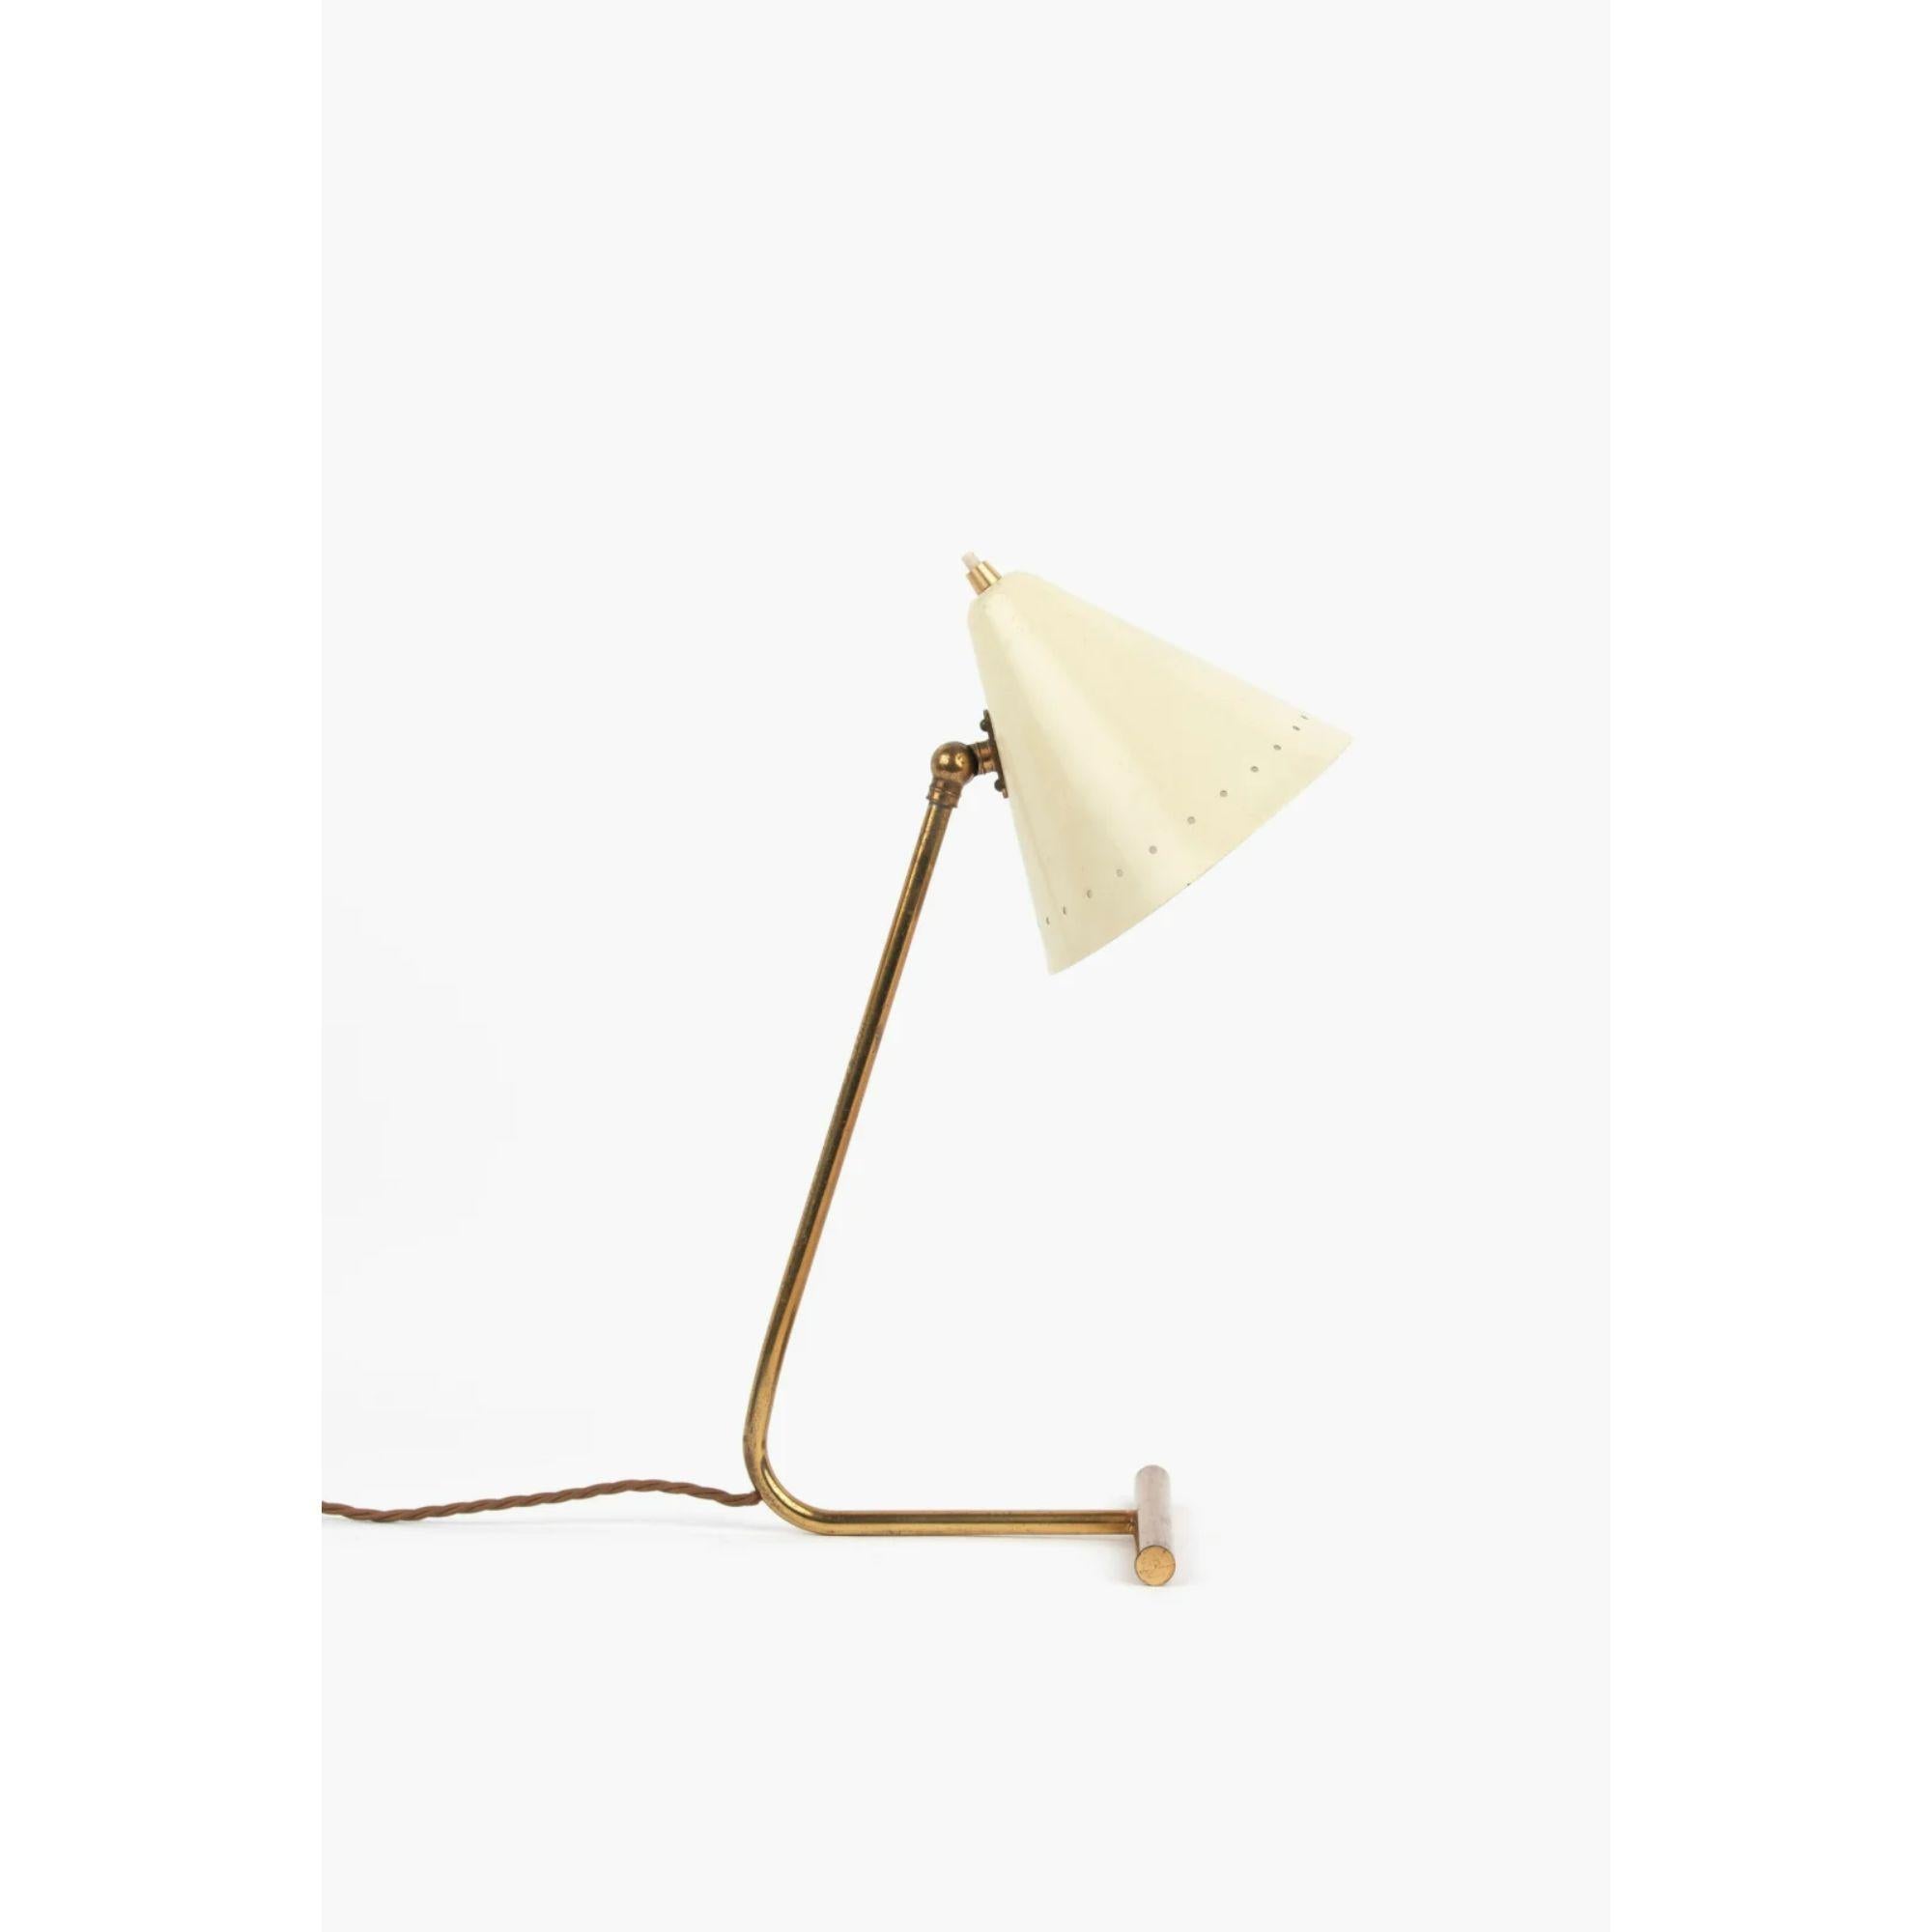 Italian desk lamp by Gilardi & Barzaghi, 1950s

Gilt tubular brass base and cream lacquered shade.

Dimensions: H 41cm x W 16cm x D 17.5cm
Condition: The original gilding has rubbed back to a wonderful patina and the shade has been re-finished